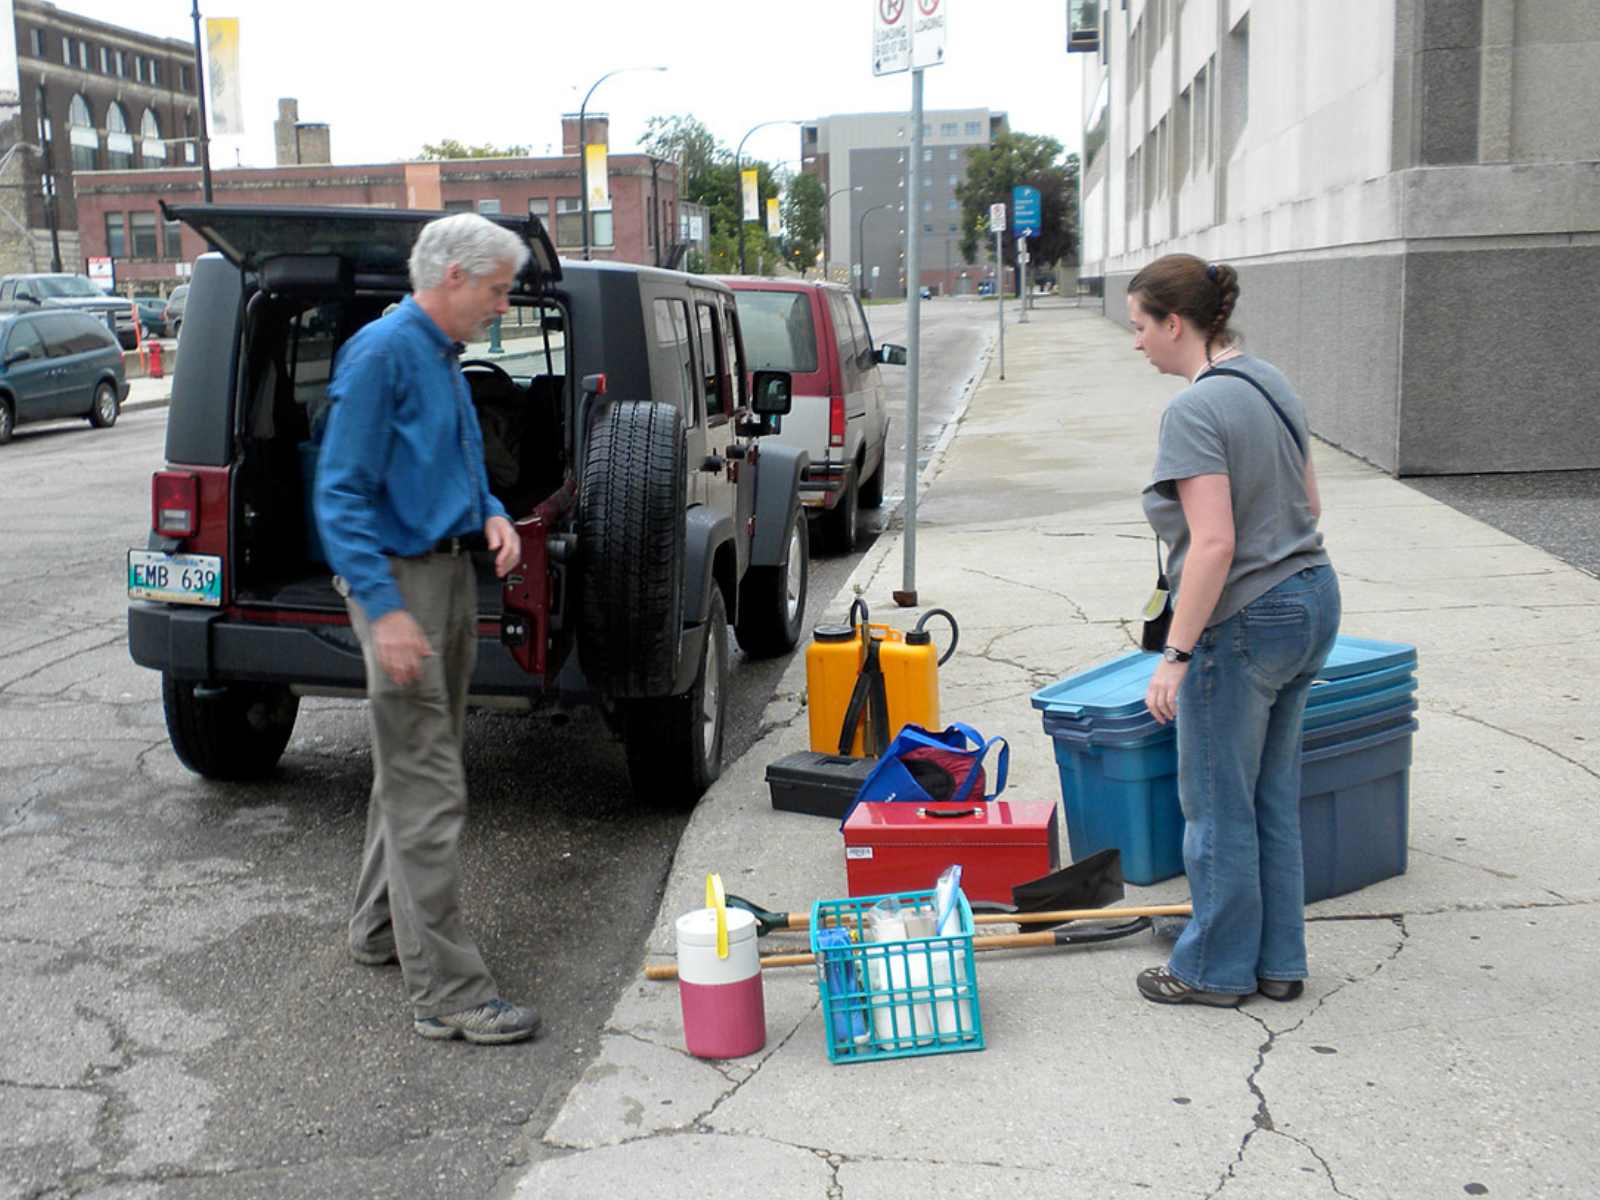 Two adults loading luggage and supplies into the back of a vehicle parked outside of the Museum.